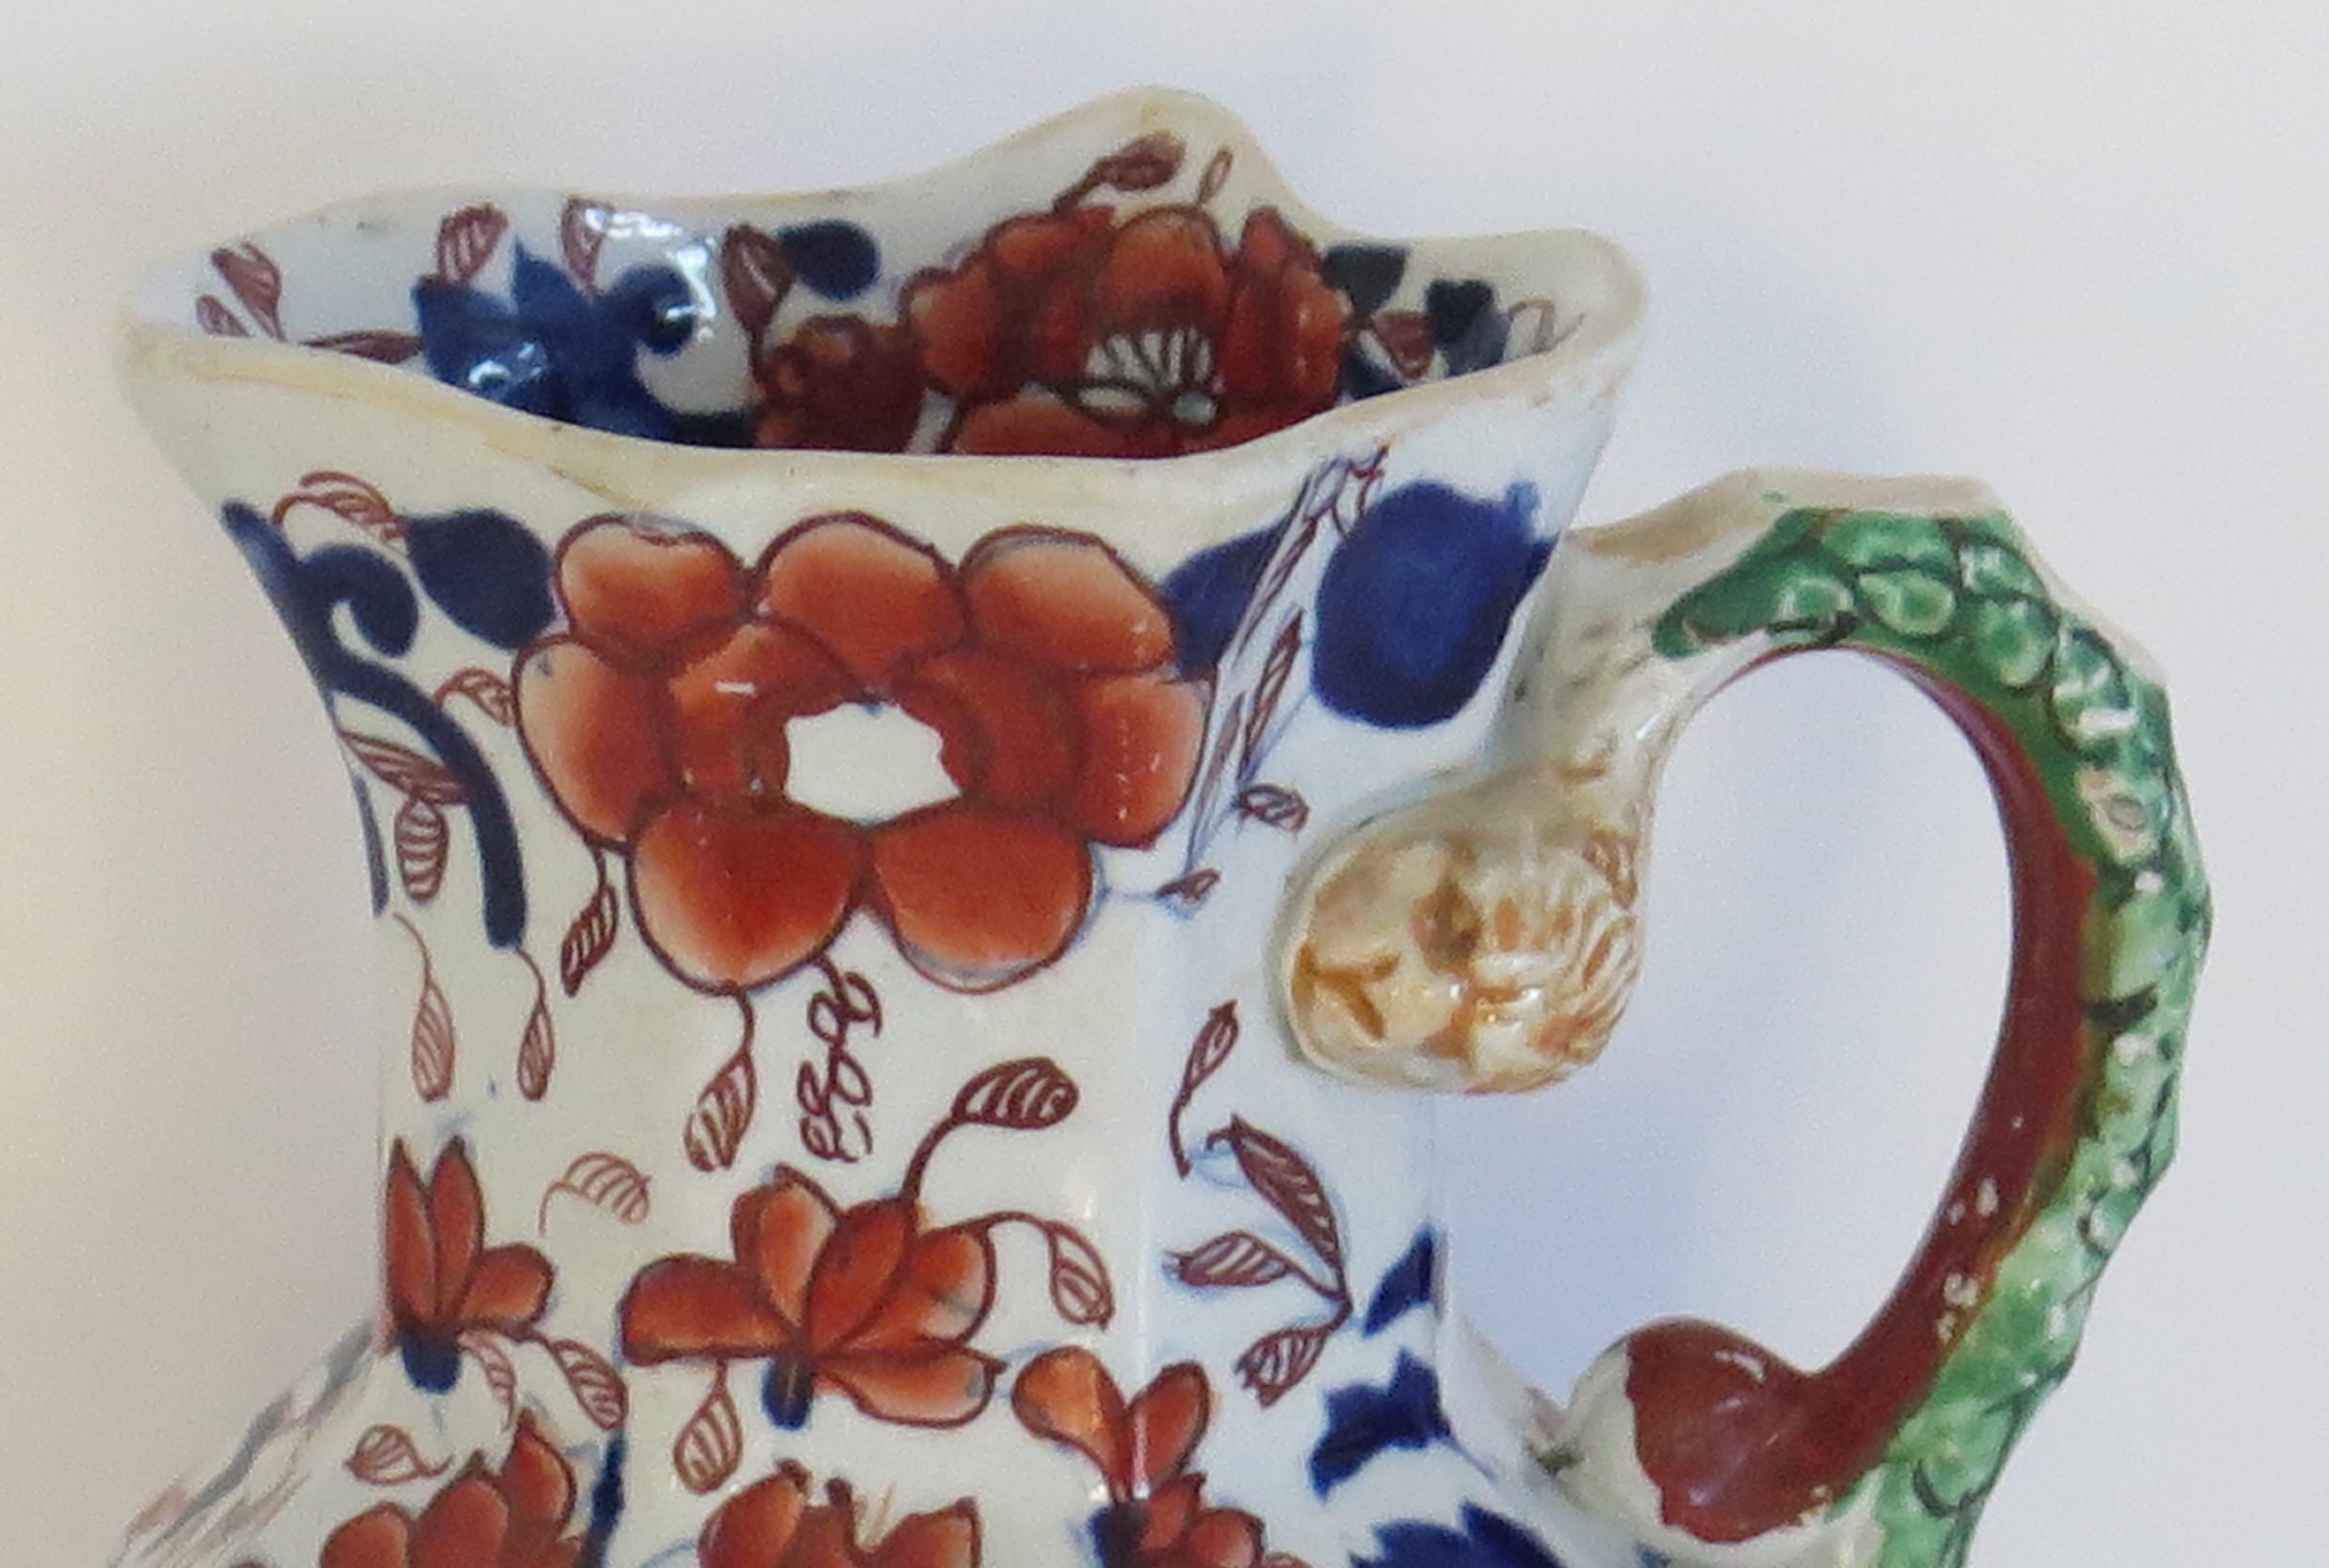 This is a very good, early Mason's Ironstone Hydra jug or pitcher in the Basket Japan pattern, made in the English, late Georgian period, circa 1815-1820.

This jug is very decorative and of mid size, as these jugs were made in a large range of